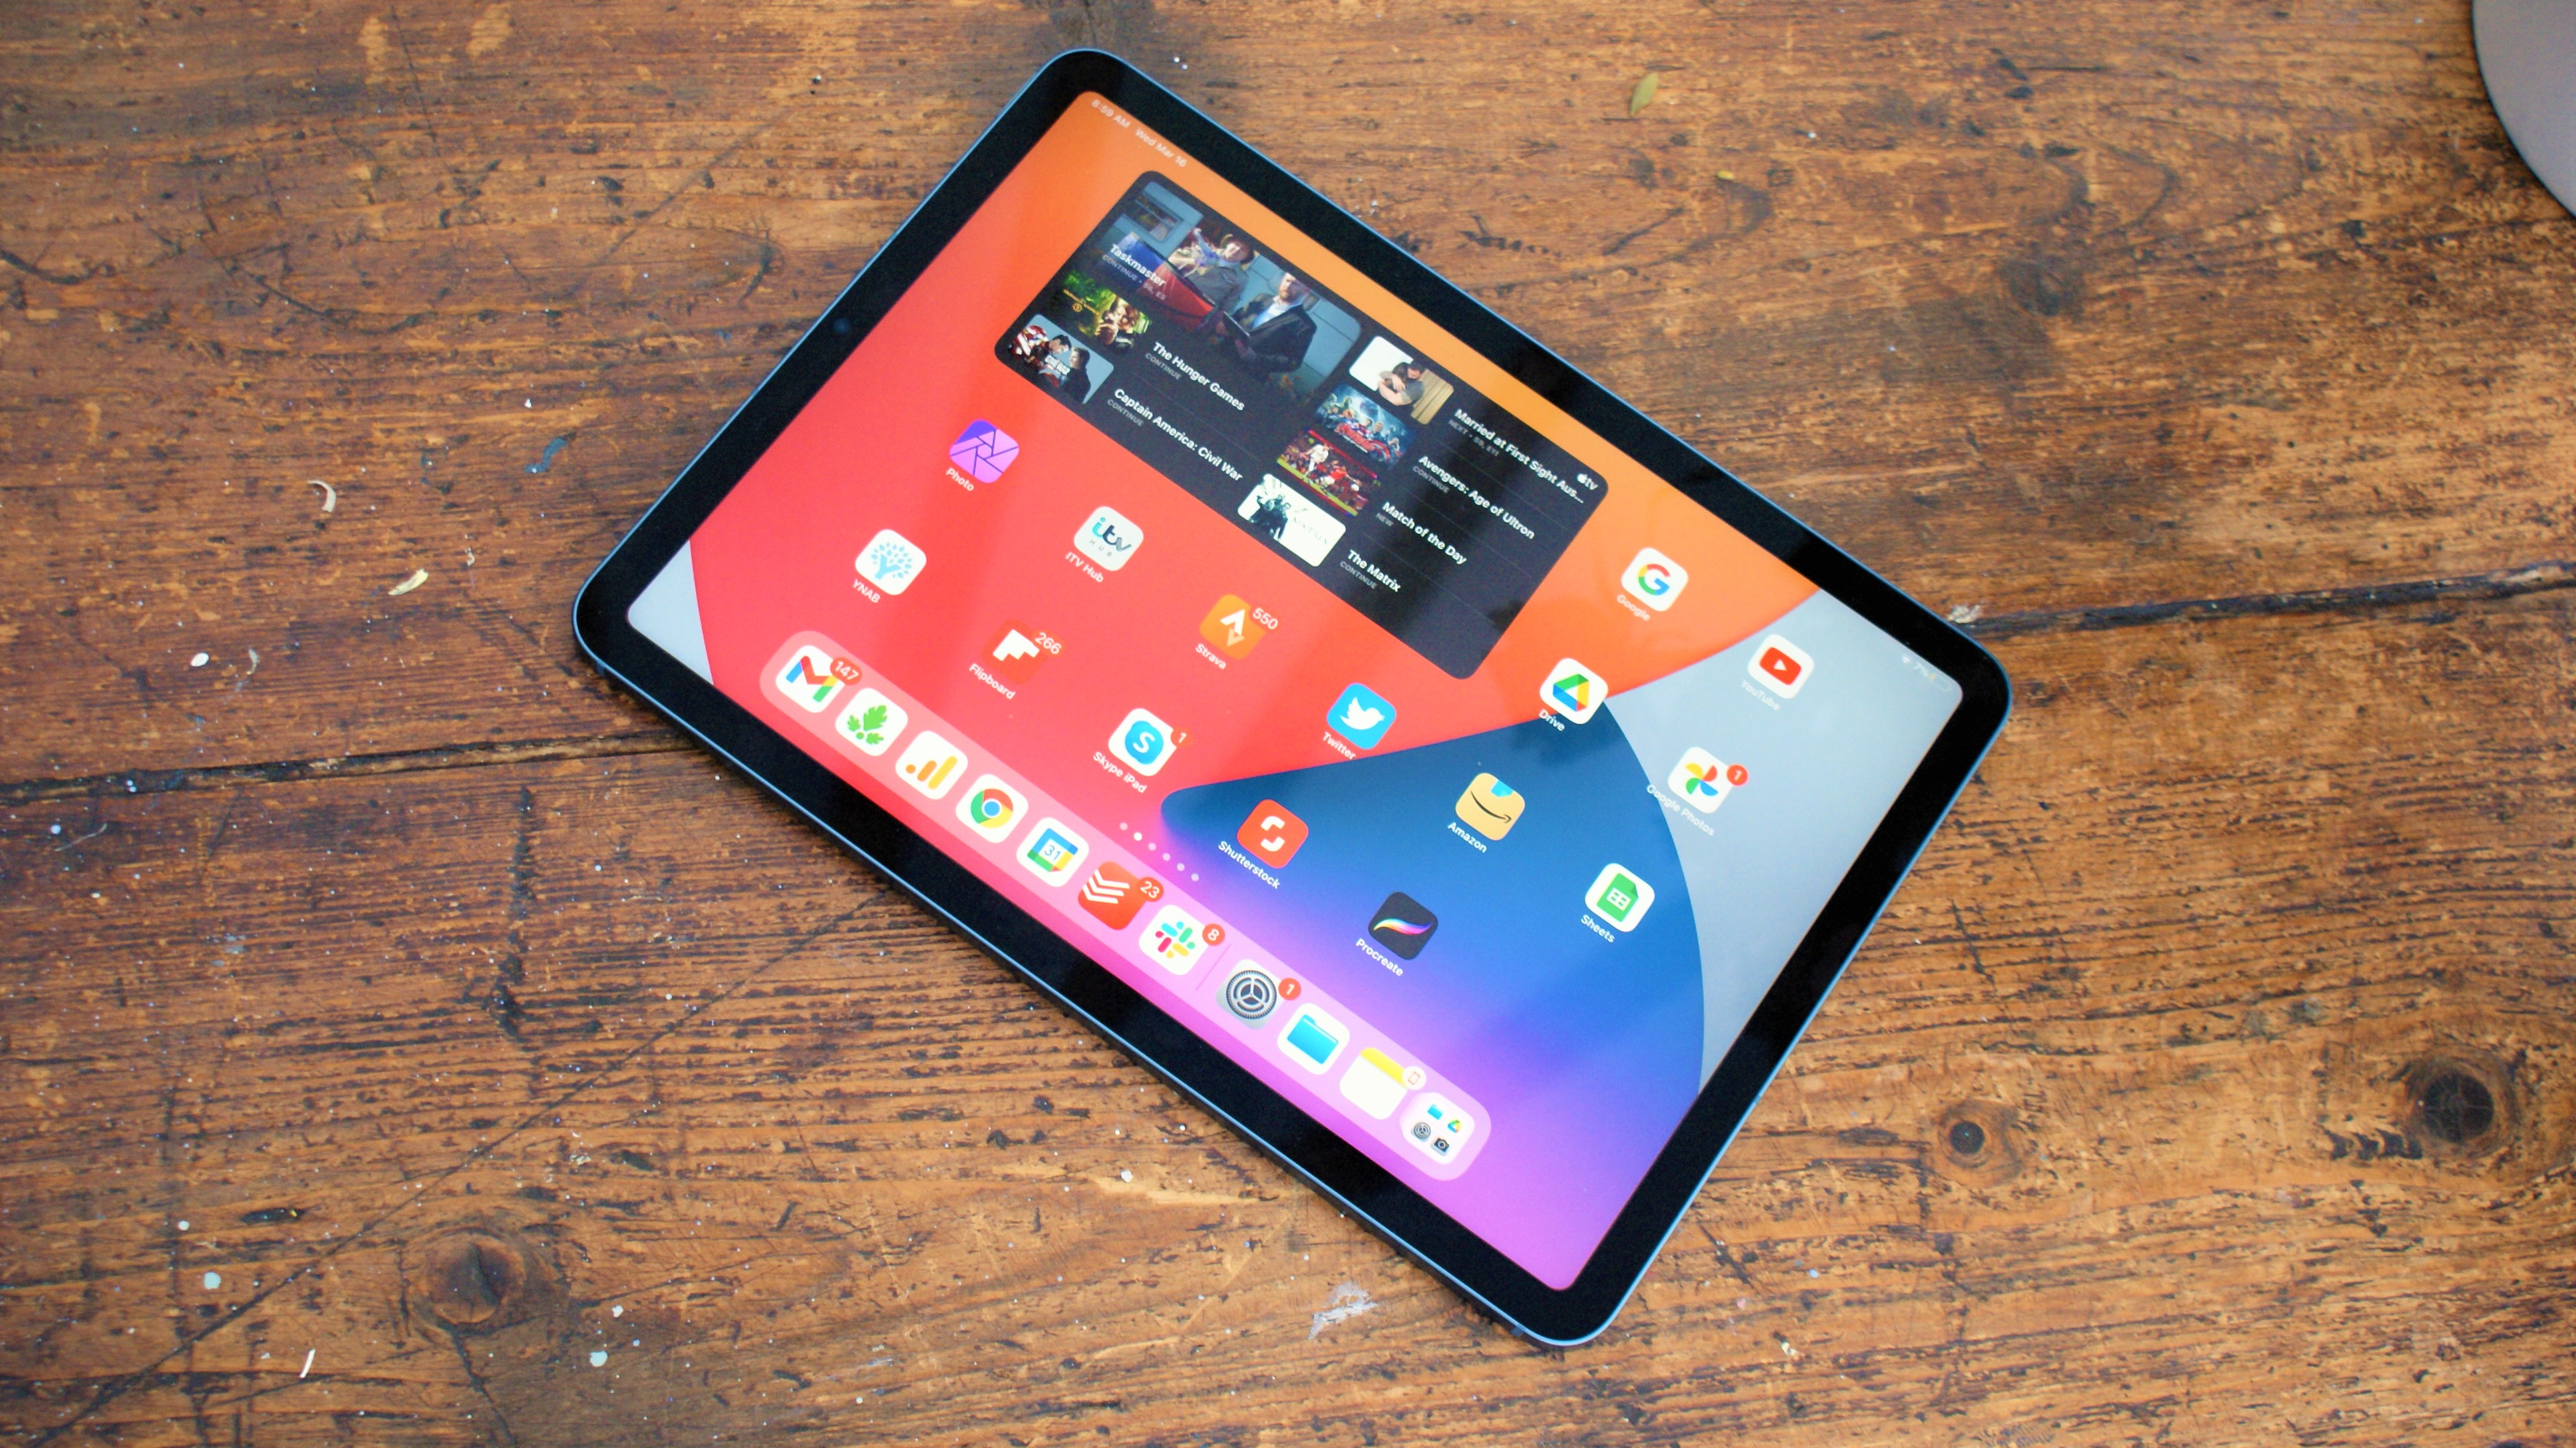 In-person images of the ipad Air 2022 in use